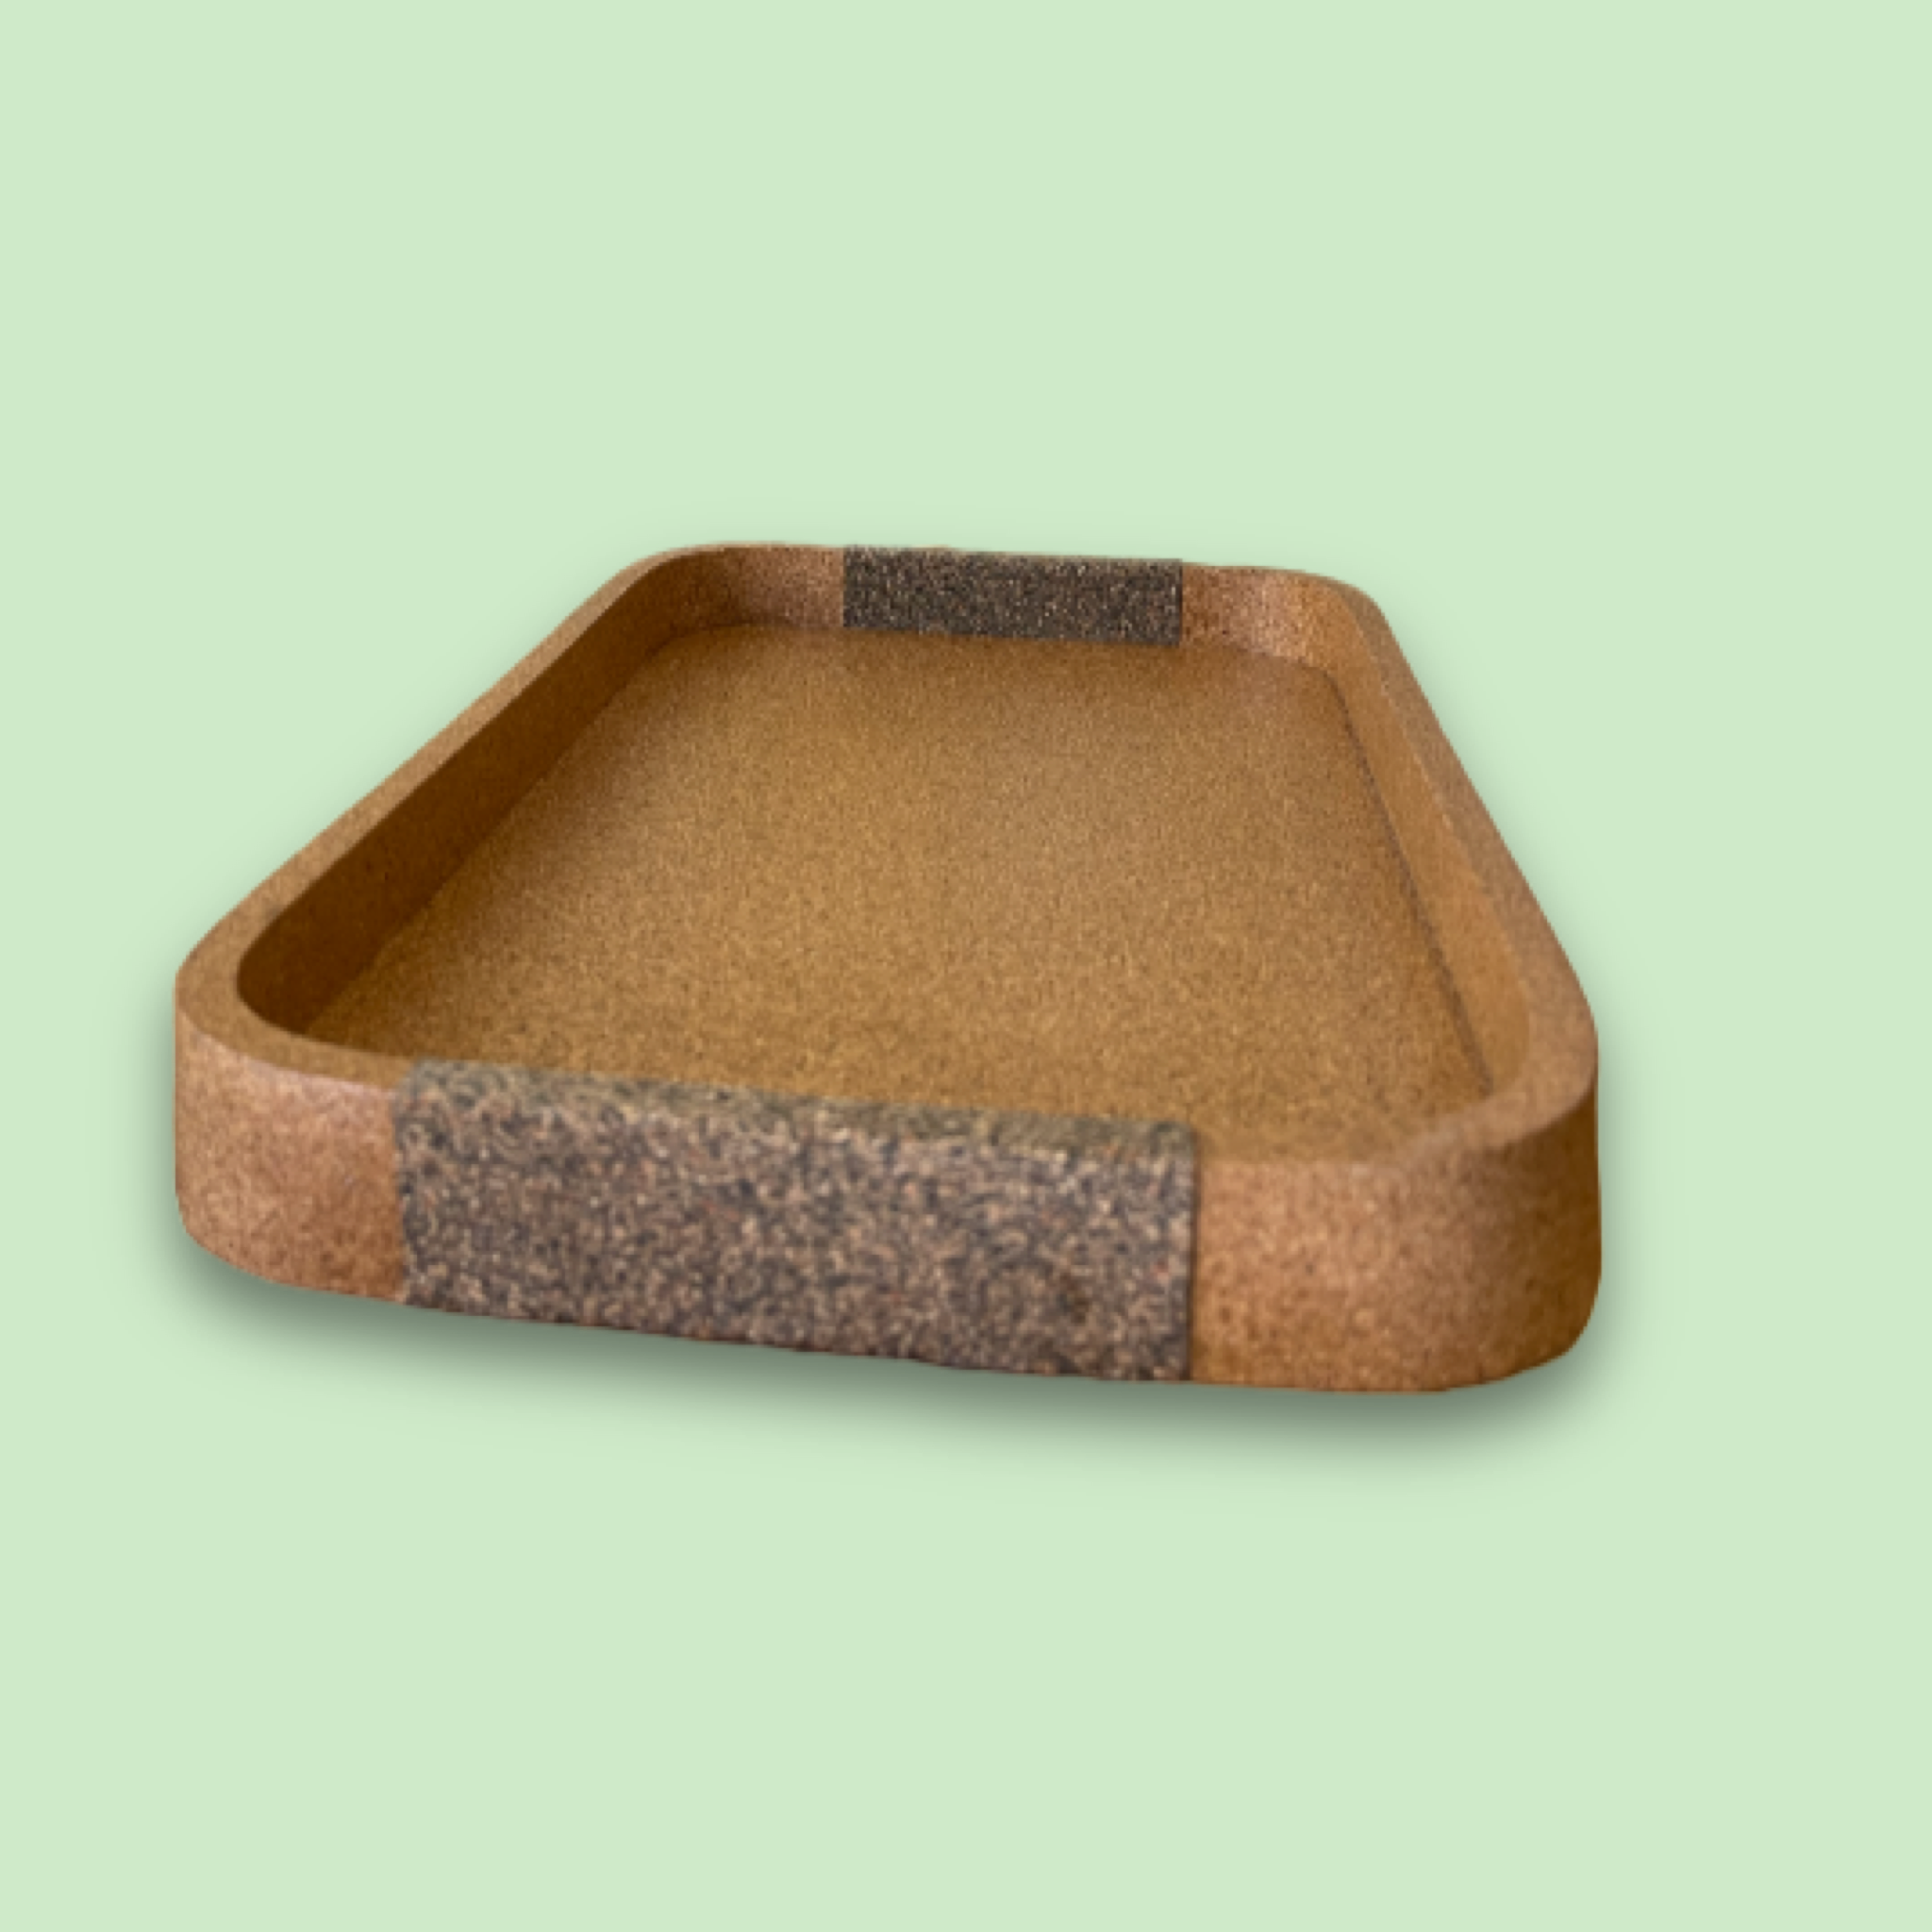 TRAY CORK by Suuuper